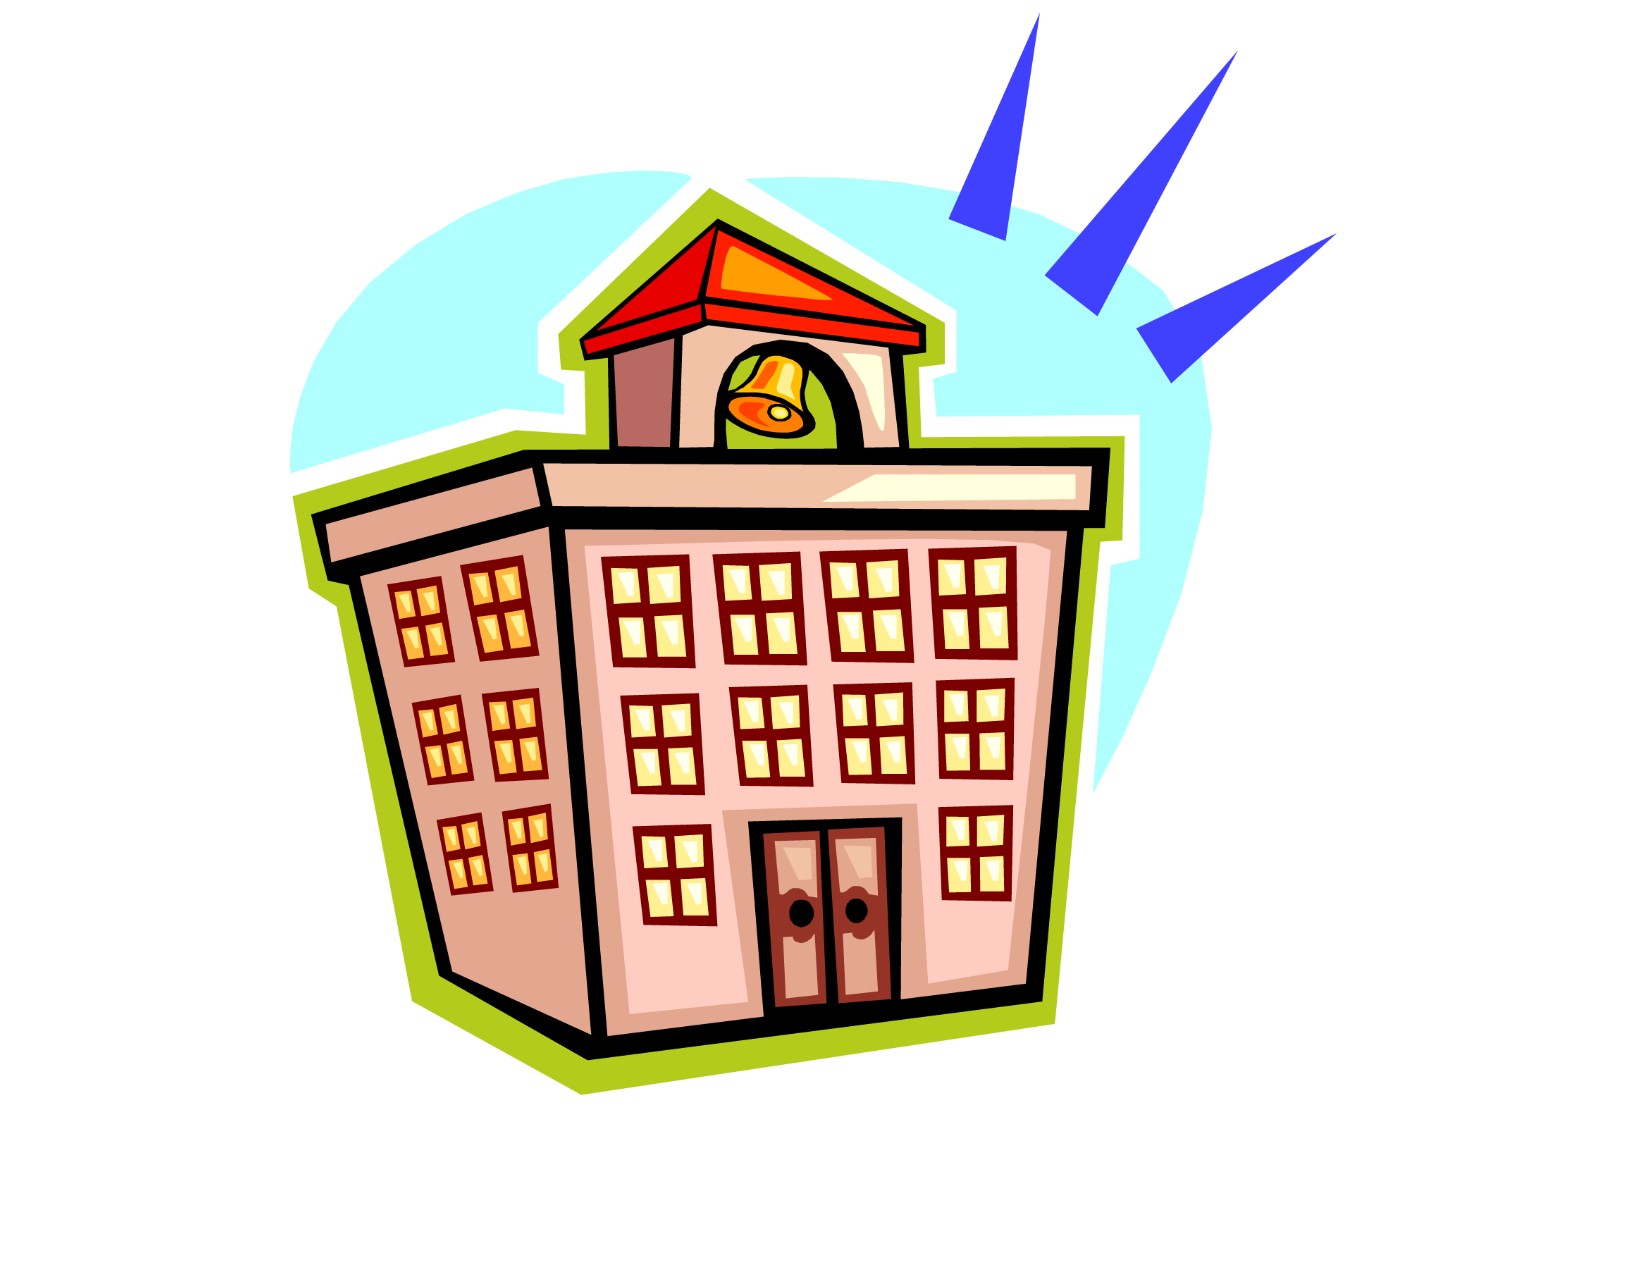 Cliparts On Schools - ClipArt Best